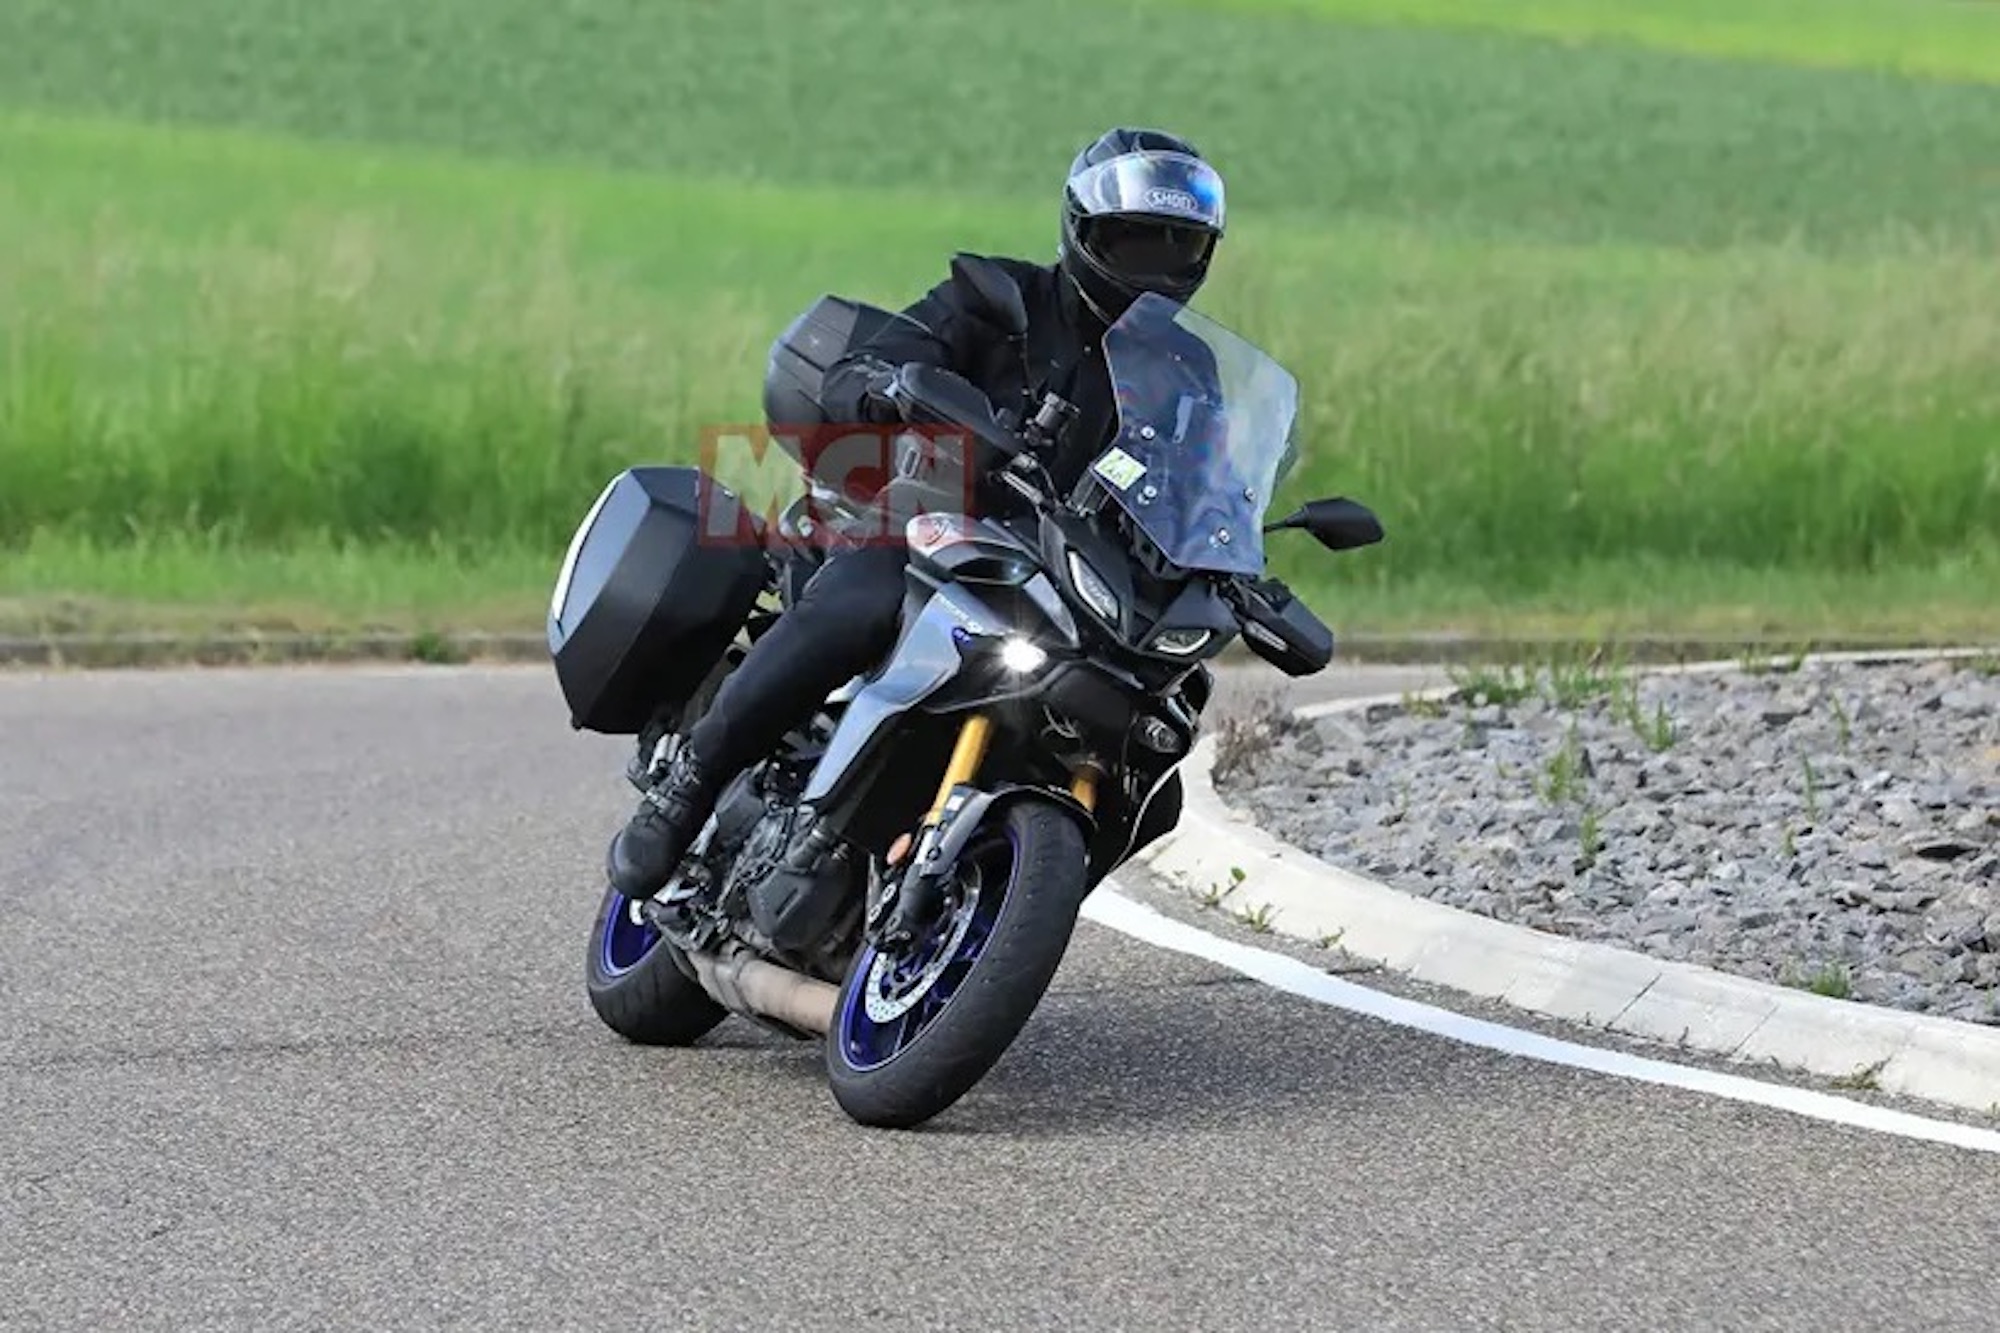 Spy shots showing a refresh for the Yamaha Tracer 9's electronics. Media sourced from MCN, with all rights reserved.